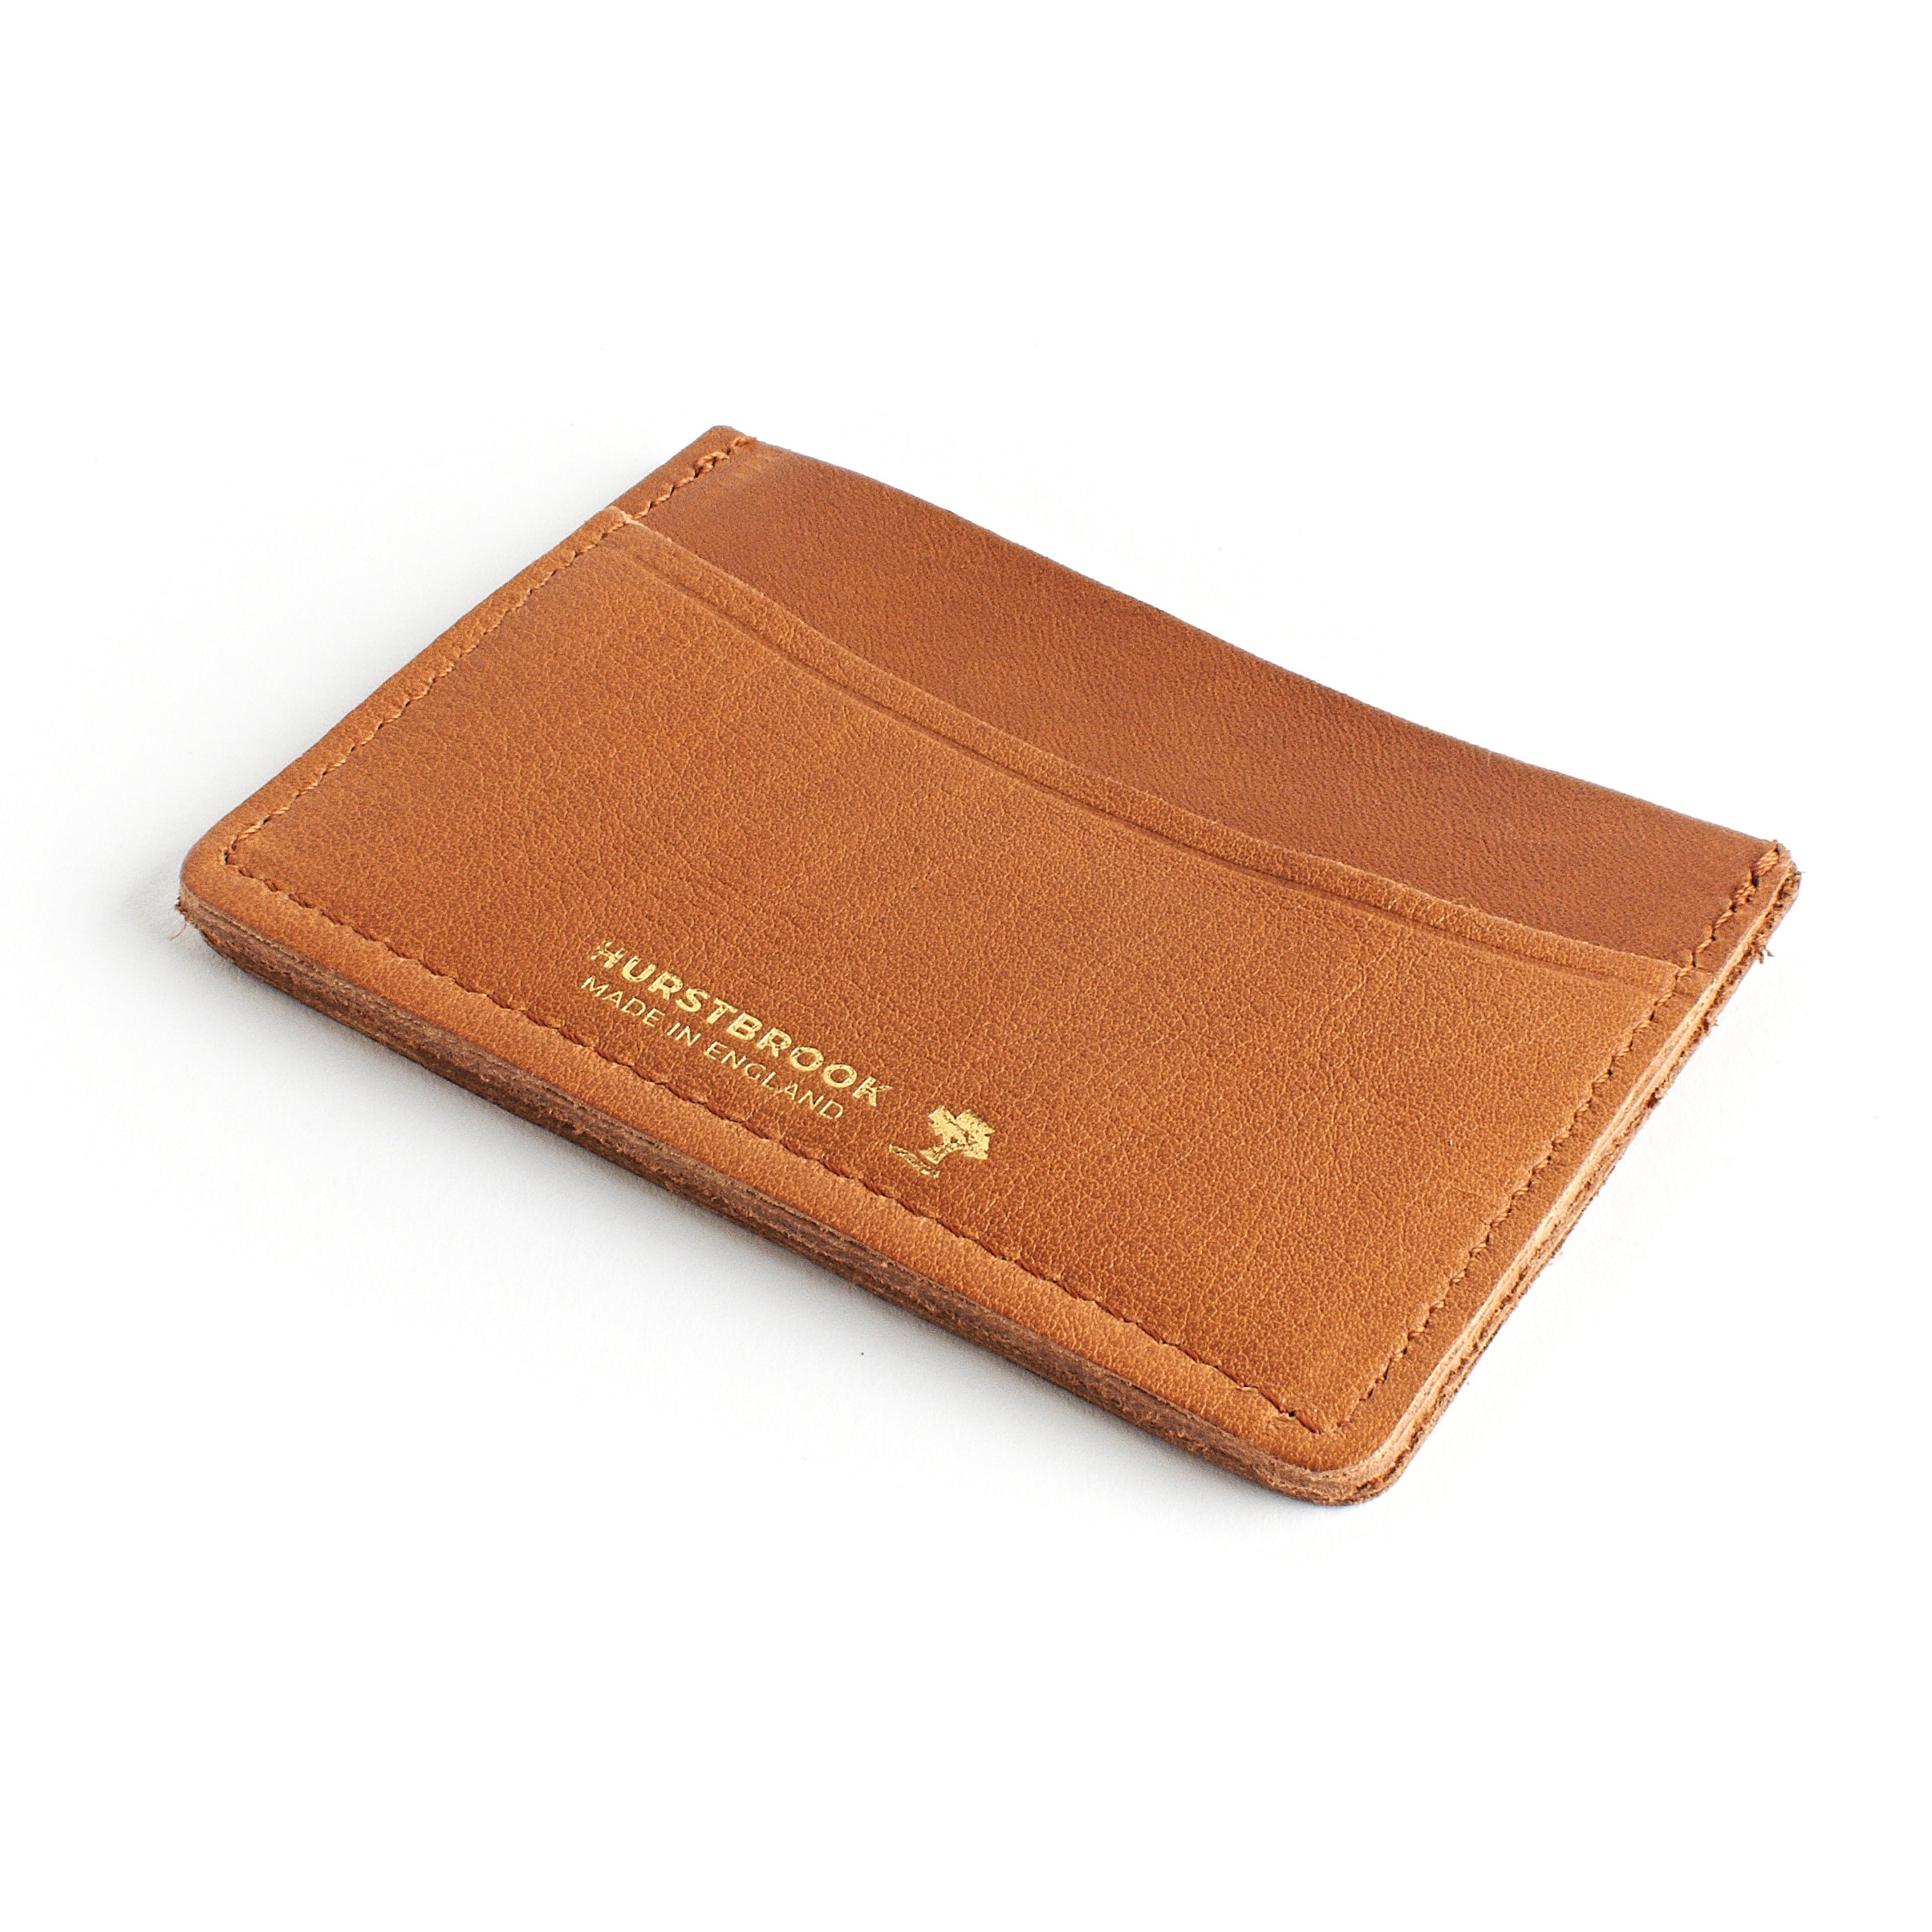 Brown/Tan Leather Card Holder Wallet  